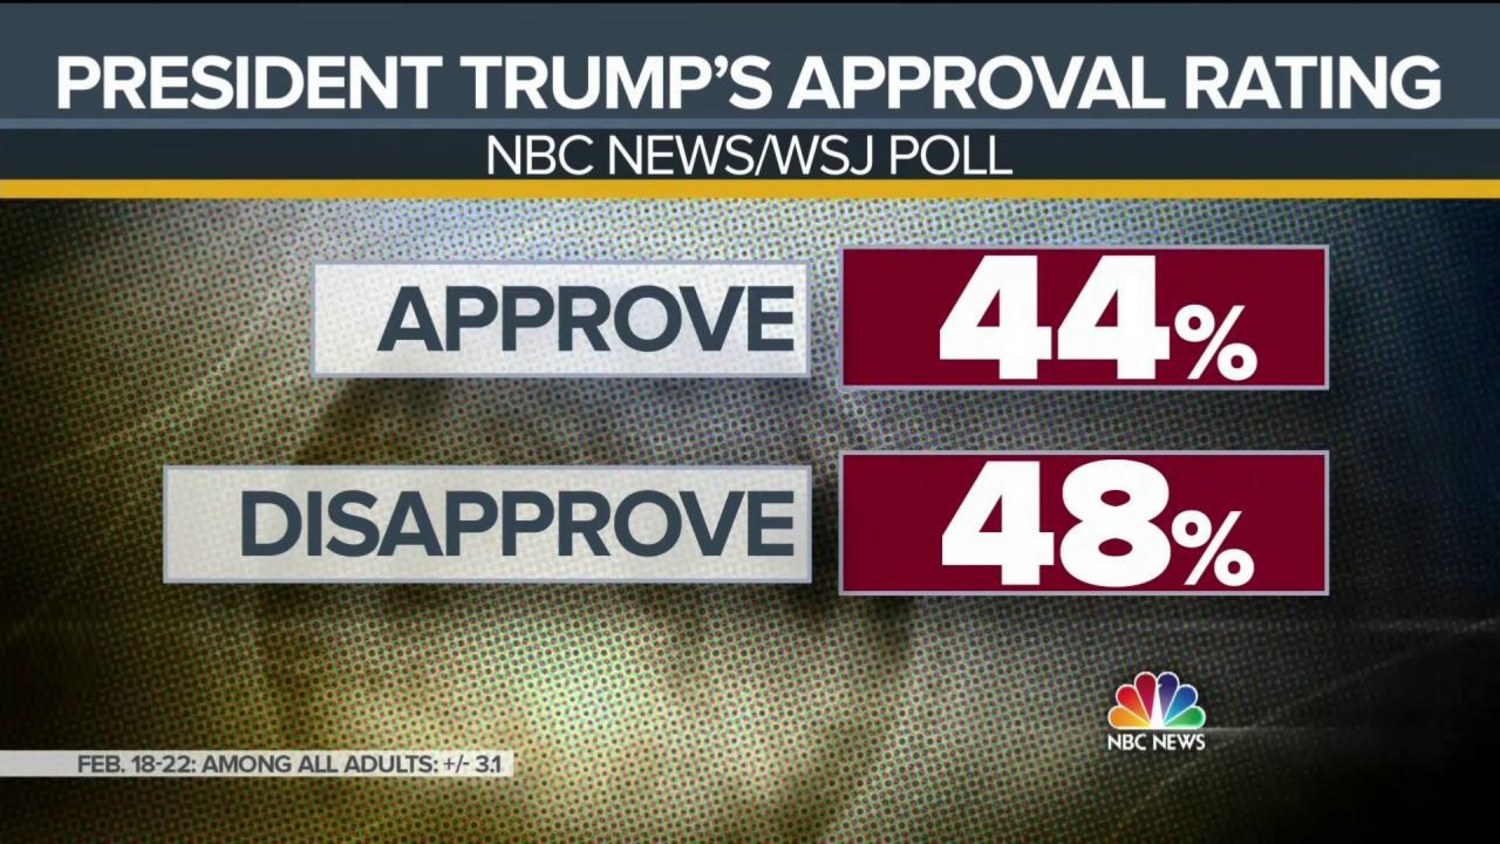 Last Trump Job Approval 34%; Average Is Record-Low 41%